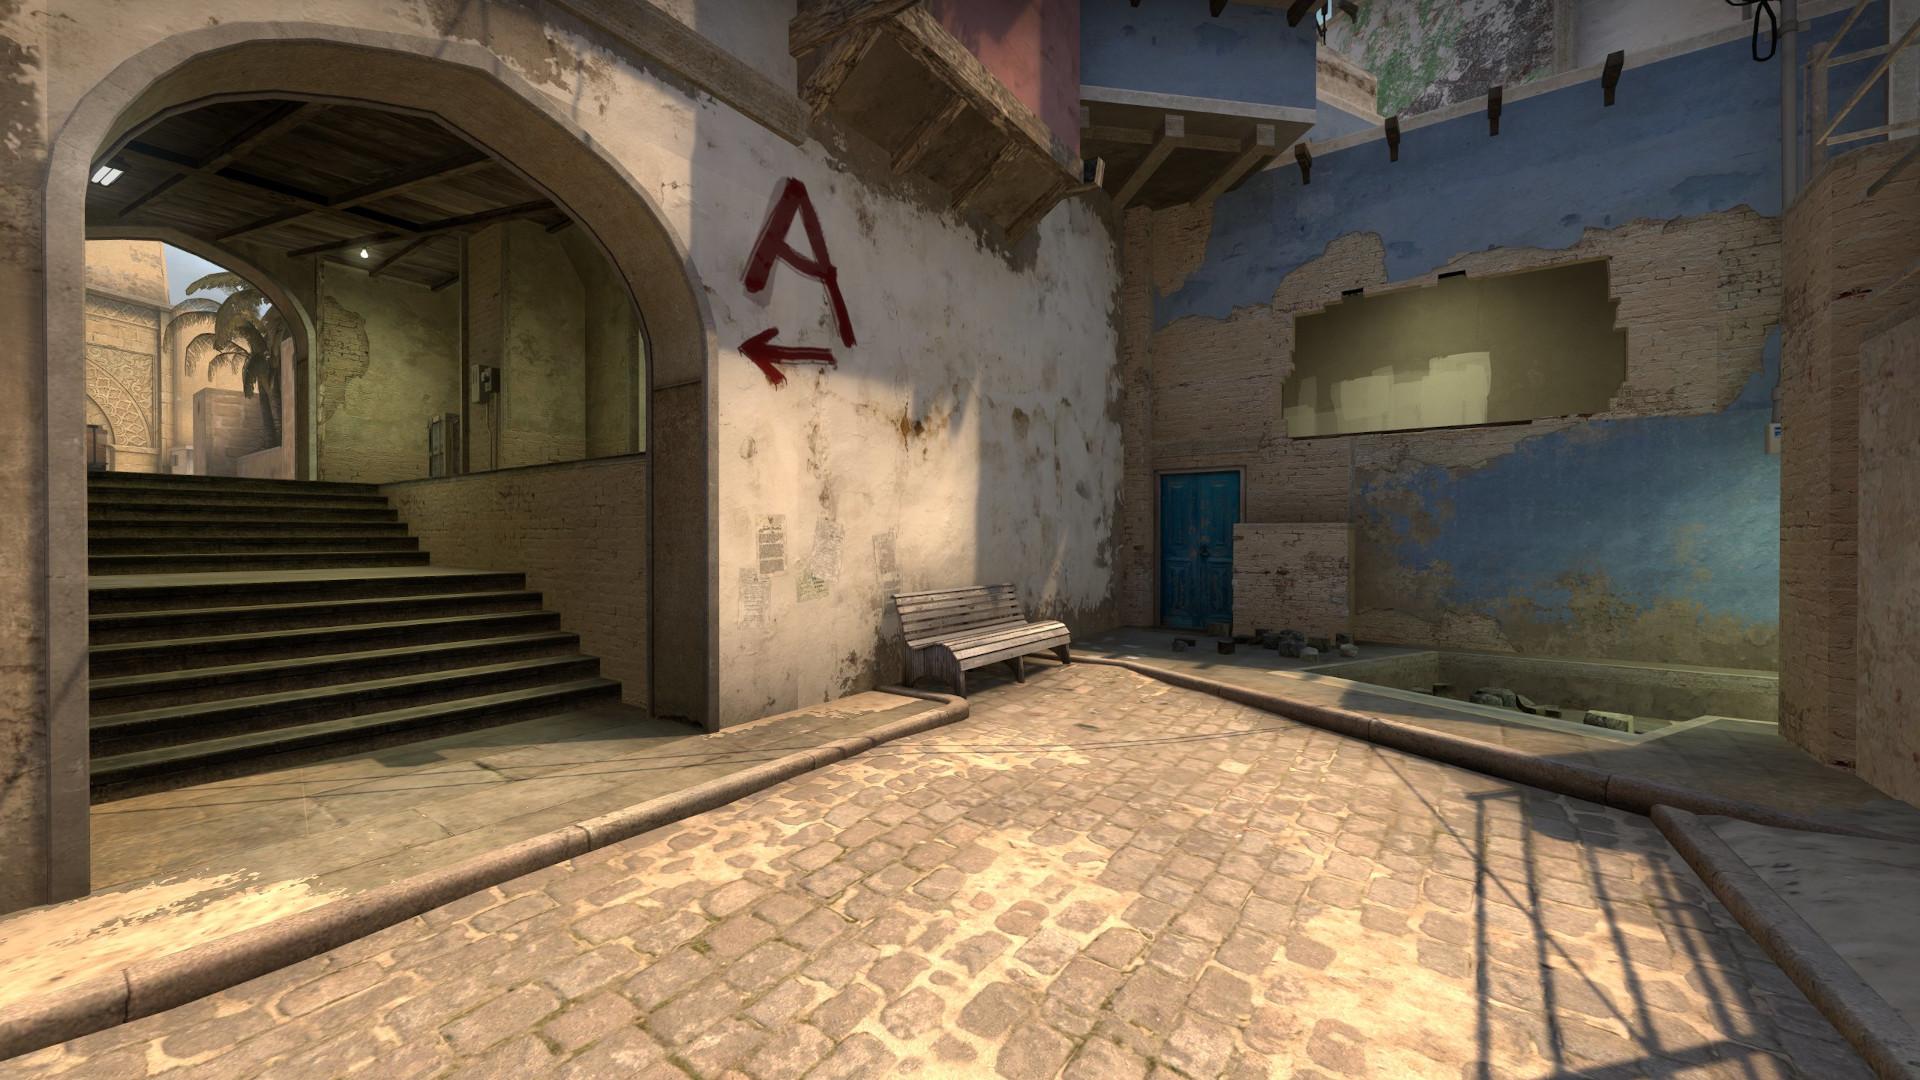 Mirage connector, mid, and snipers nest in CSGO